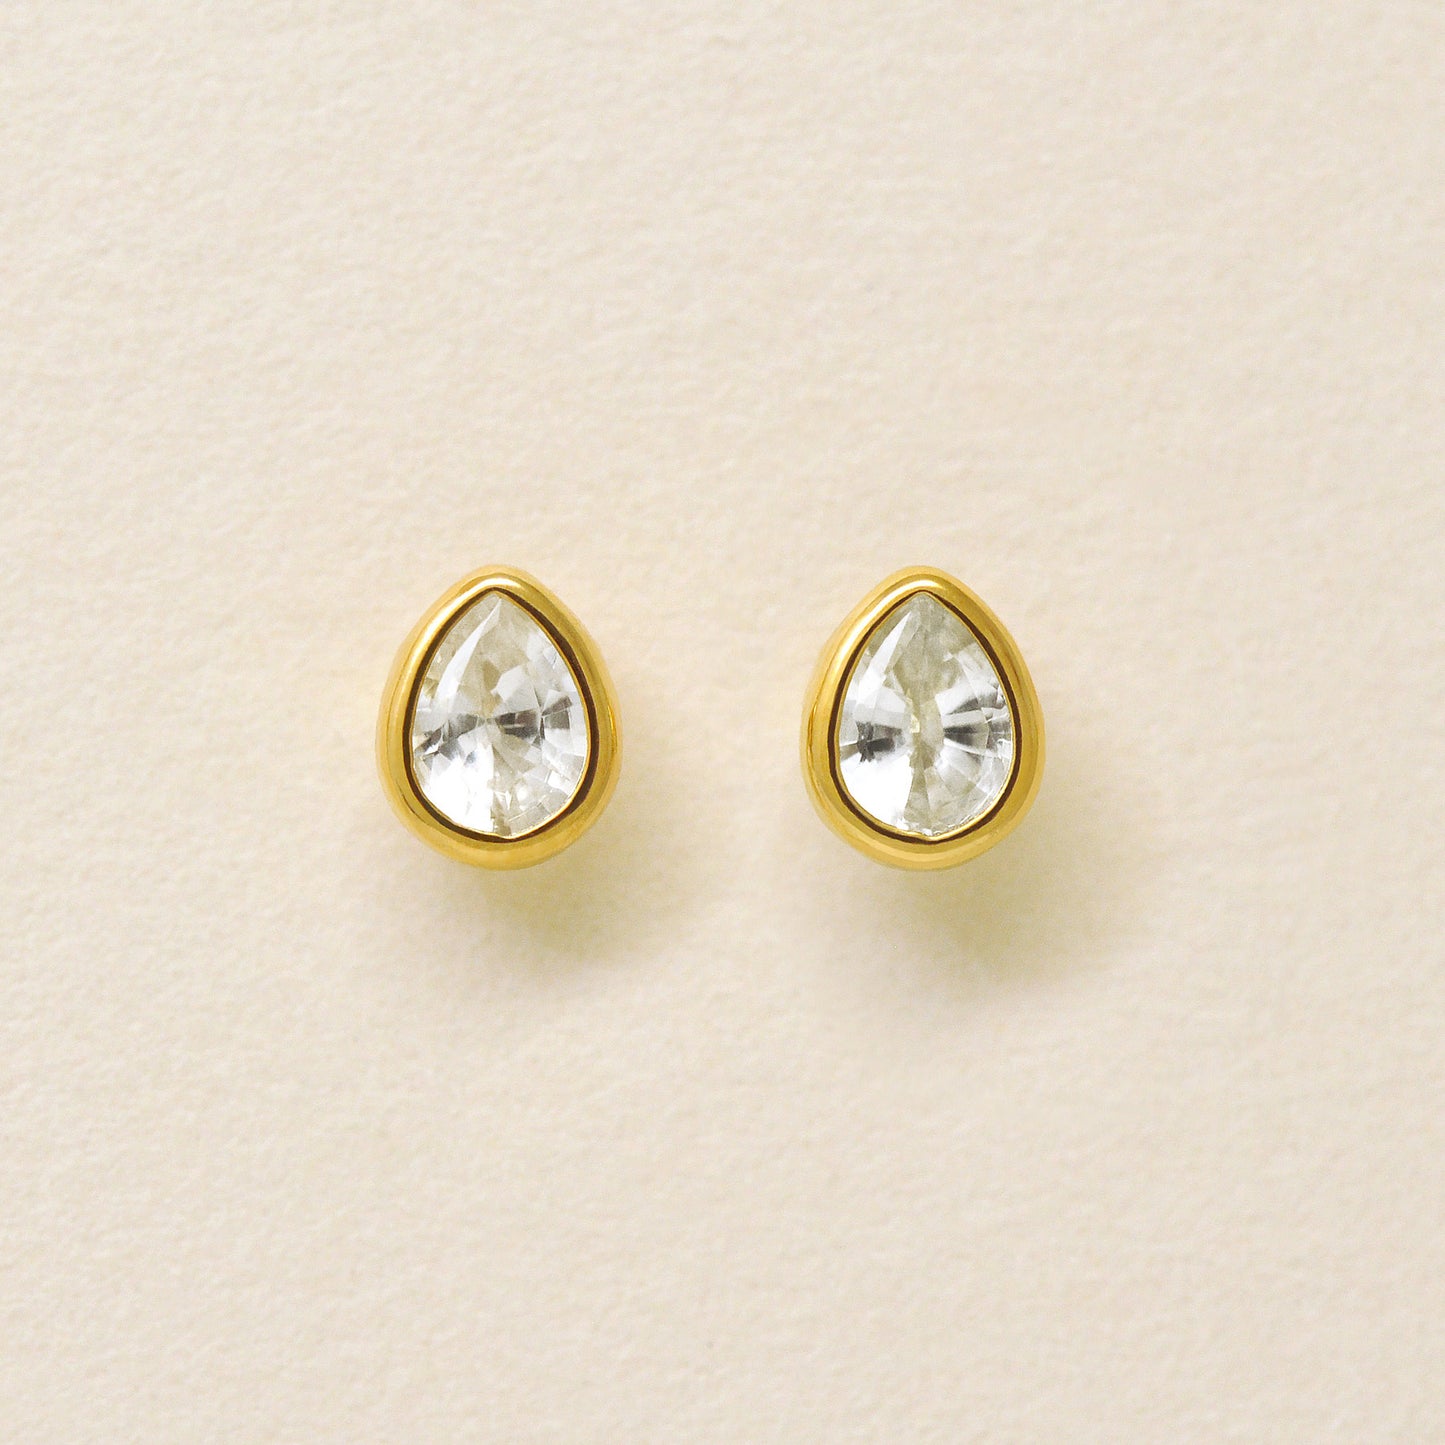 [Second Earrings] 18K Yellow Gold White Sapphire Drop Earrings - Product Image